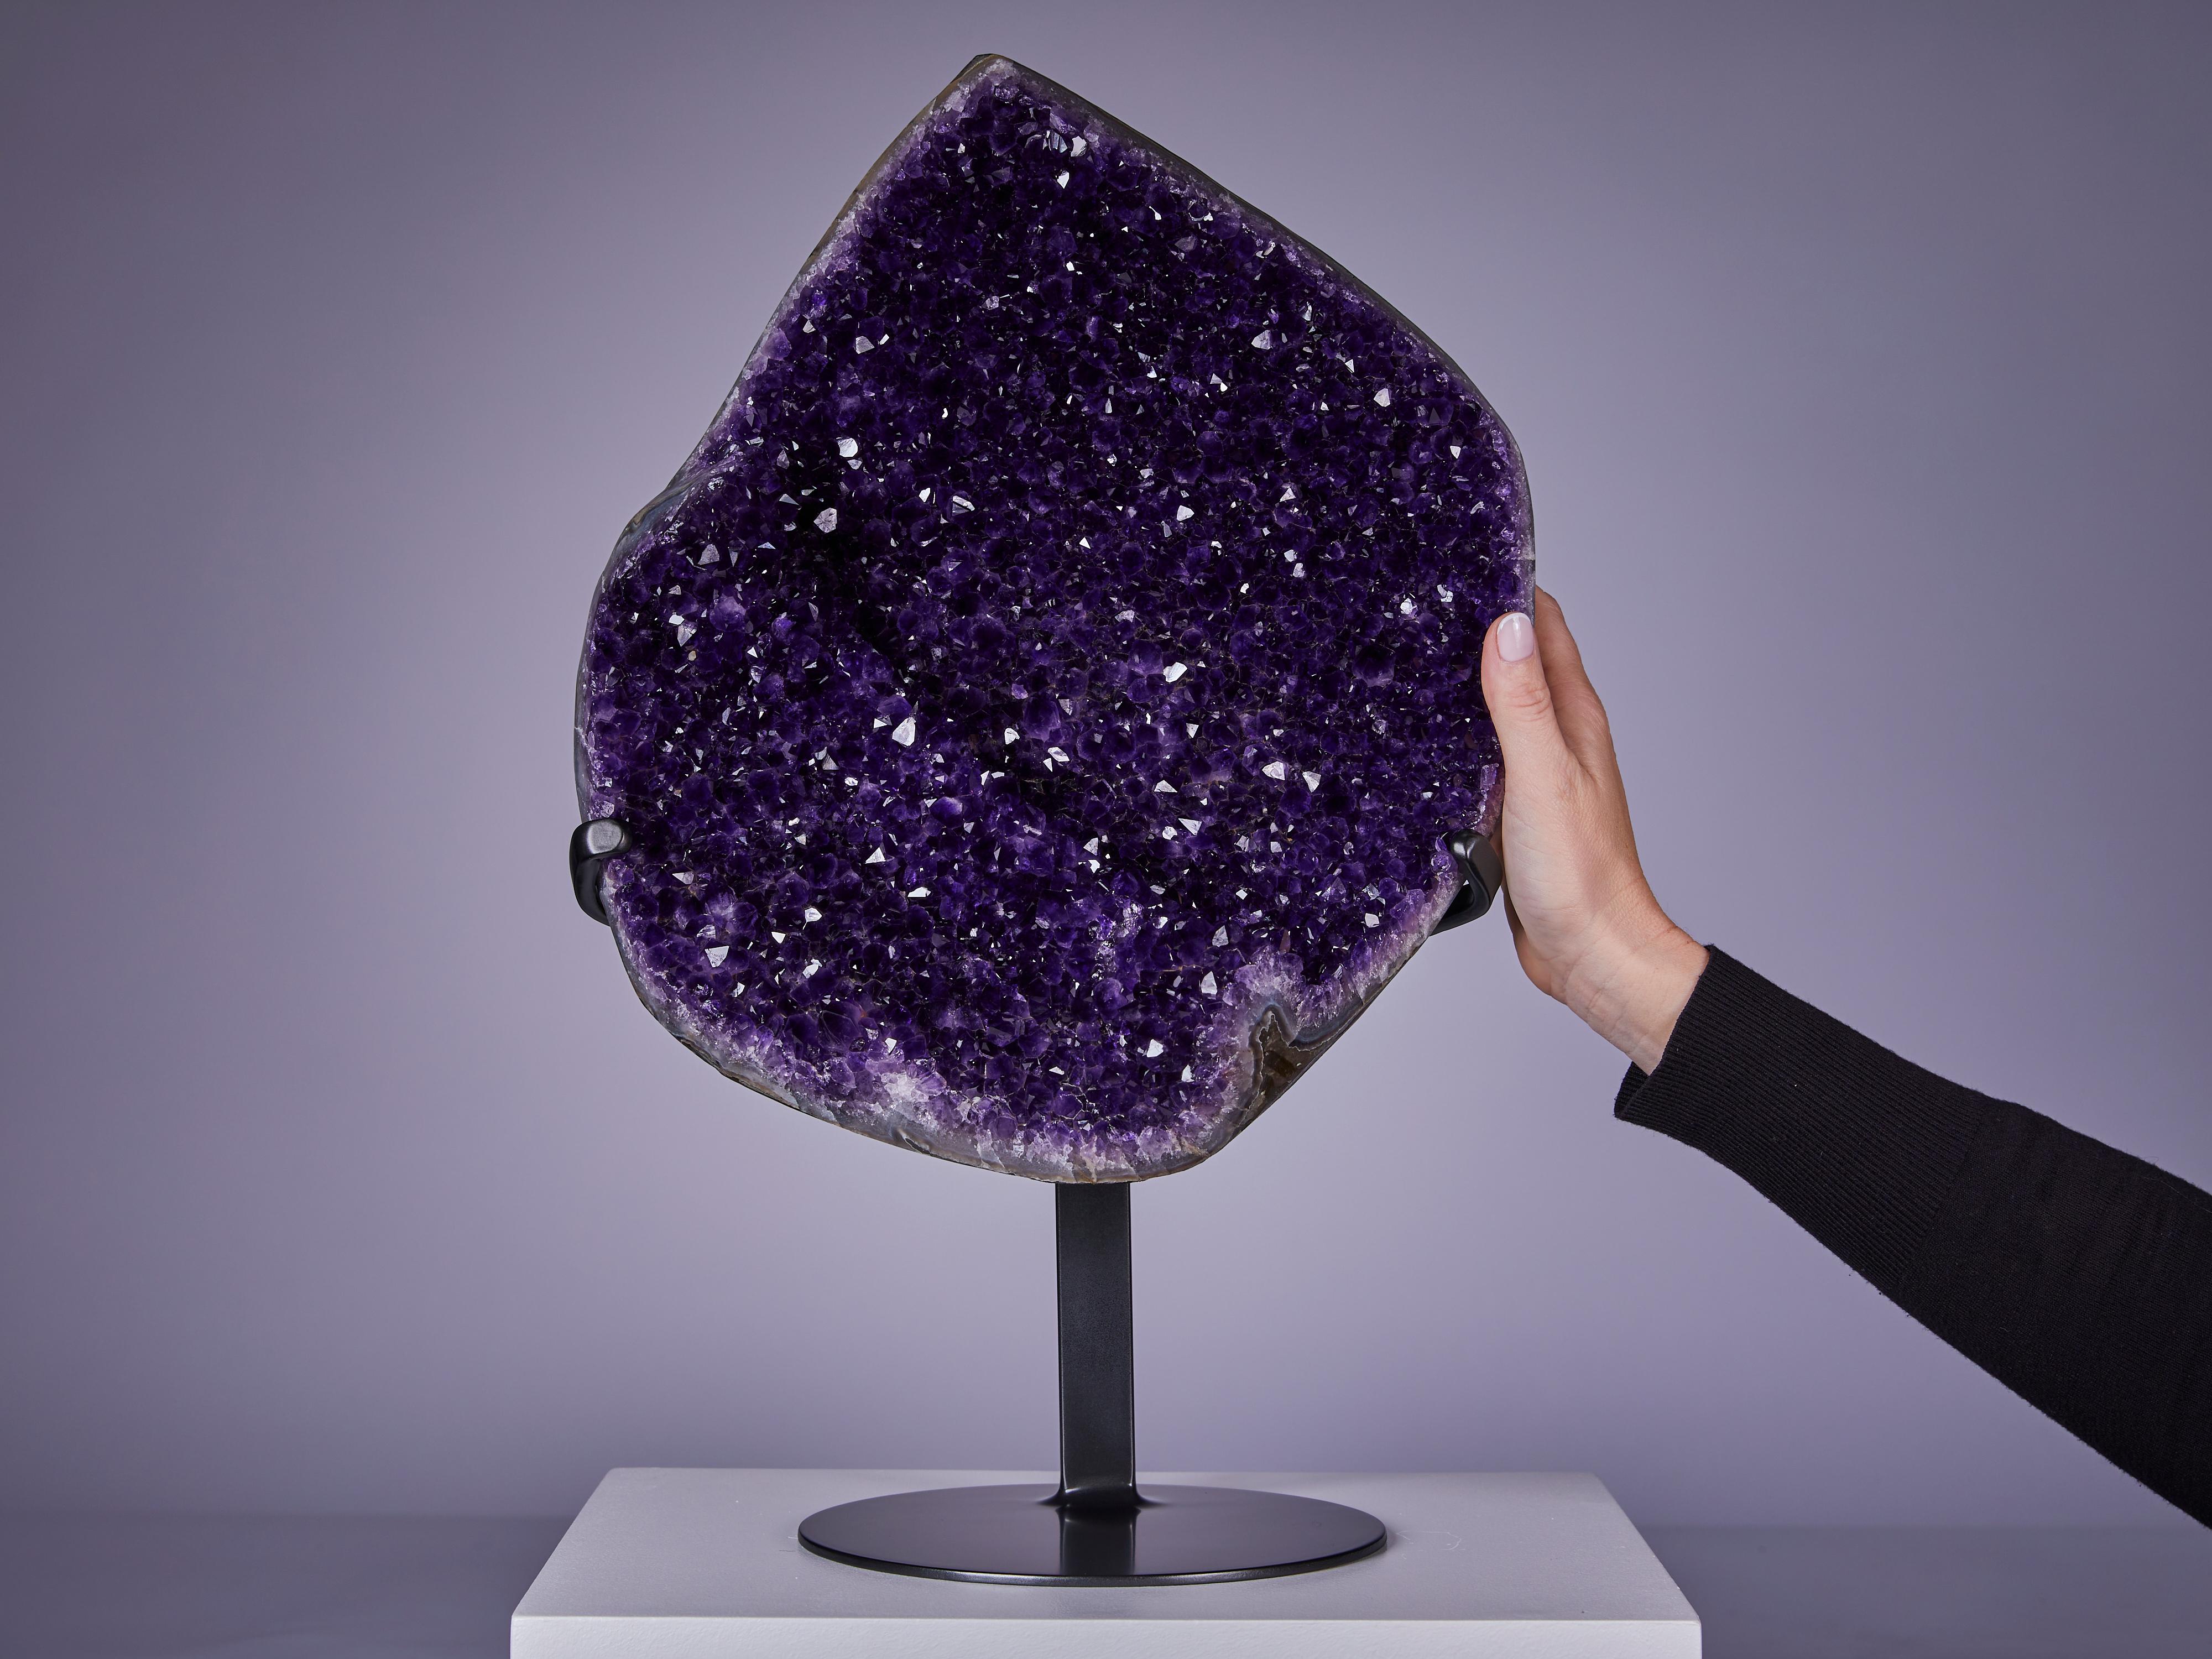 Beautiful section of an amethyst geode, unusually thin in cross section and resembling a shell with gorgeous deep purple amethyst lining.
Origin : Artigas, Uruguay




